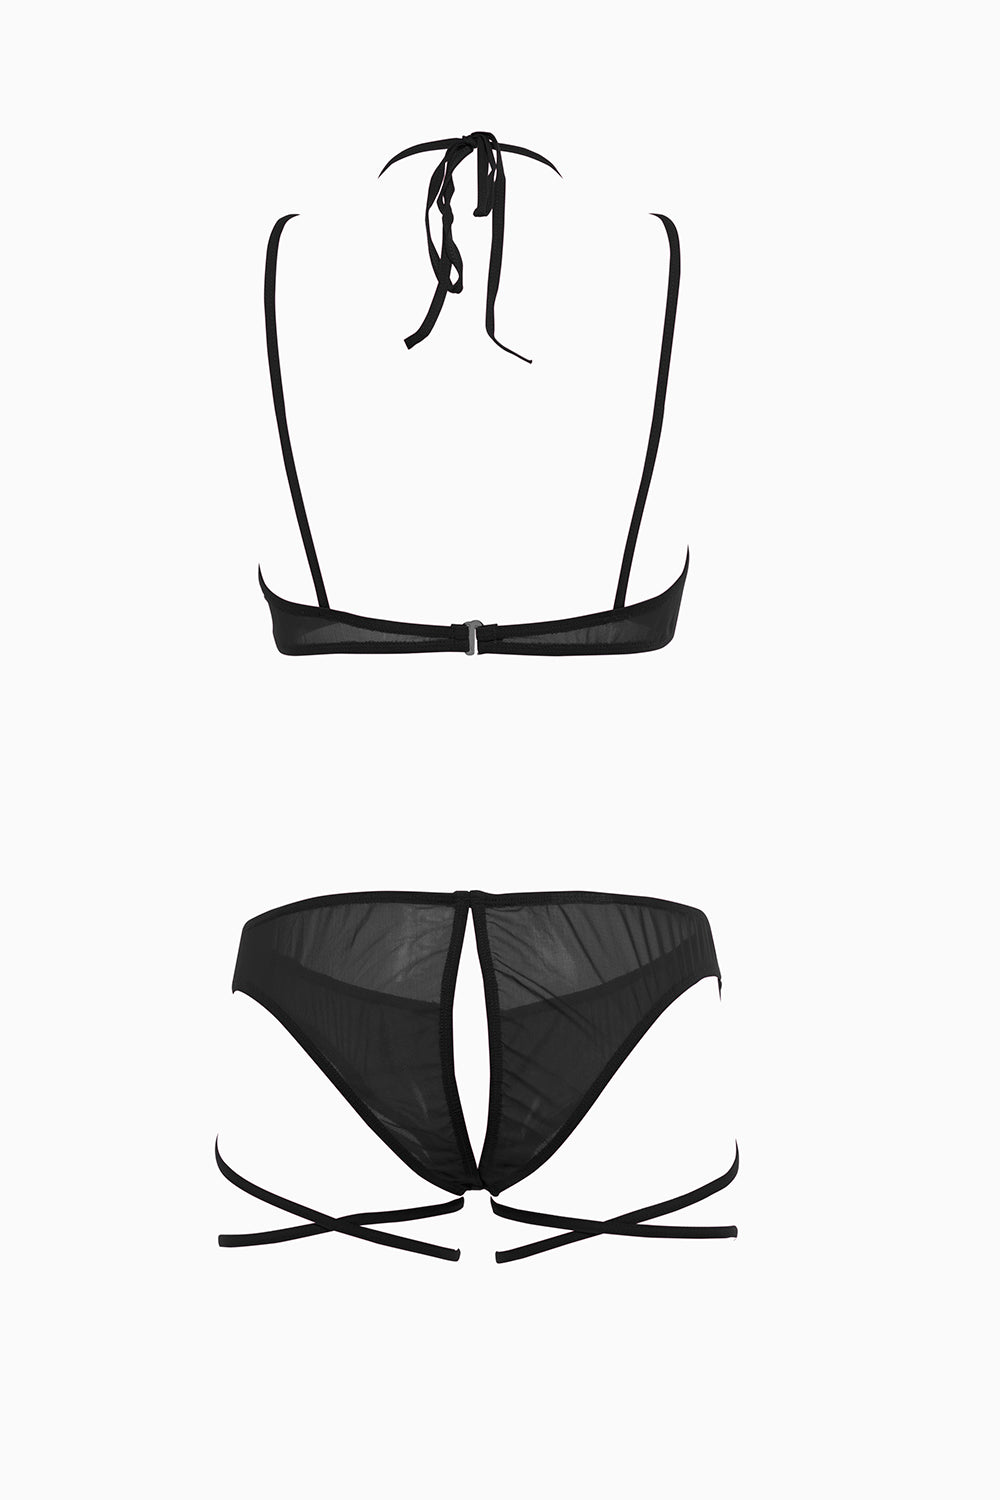 Allure Collection Monique Open Bra & G-String Set with Criss Cross Thigh Straps Black One Size